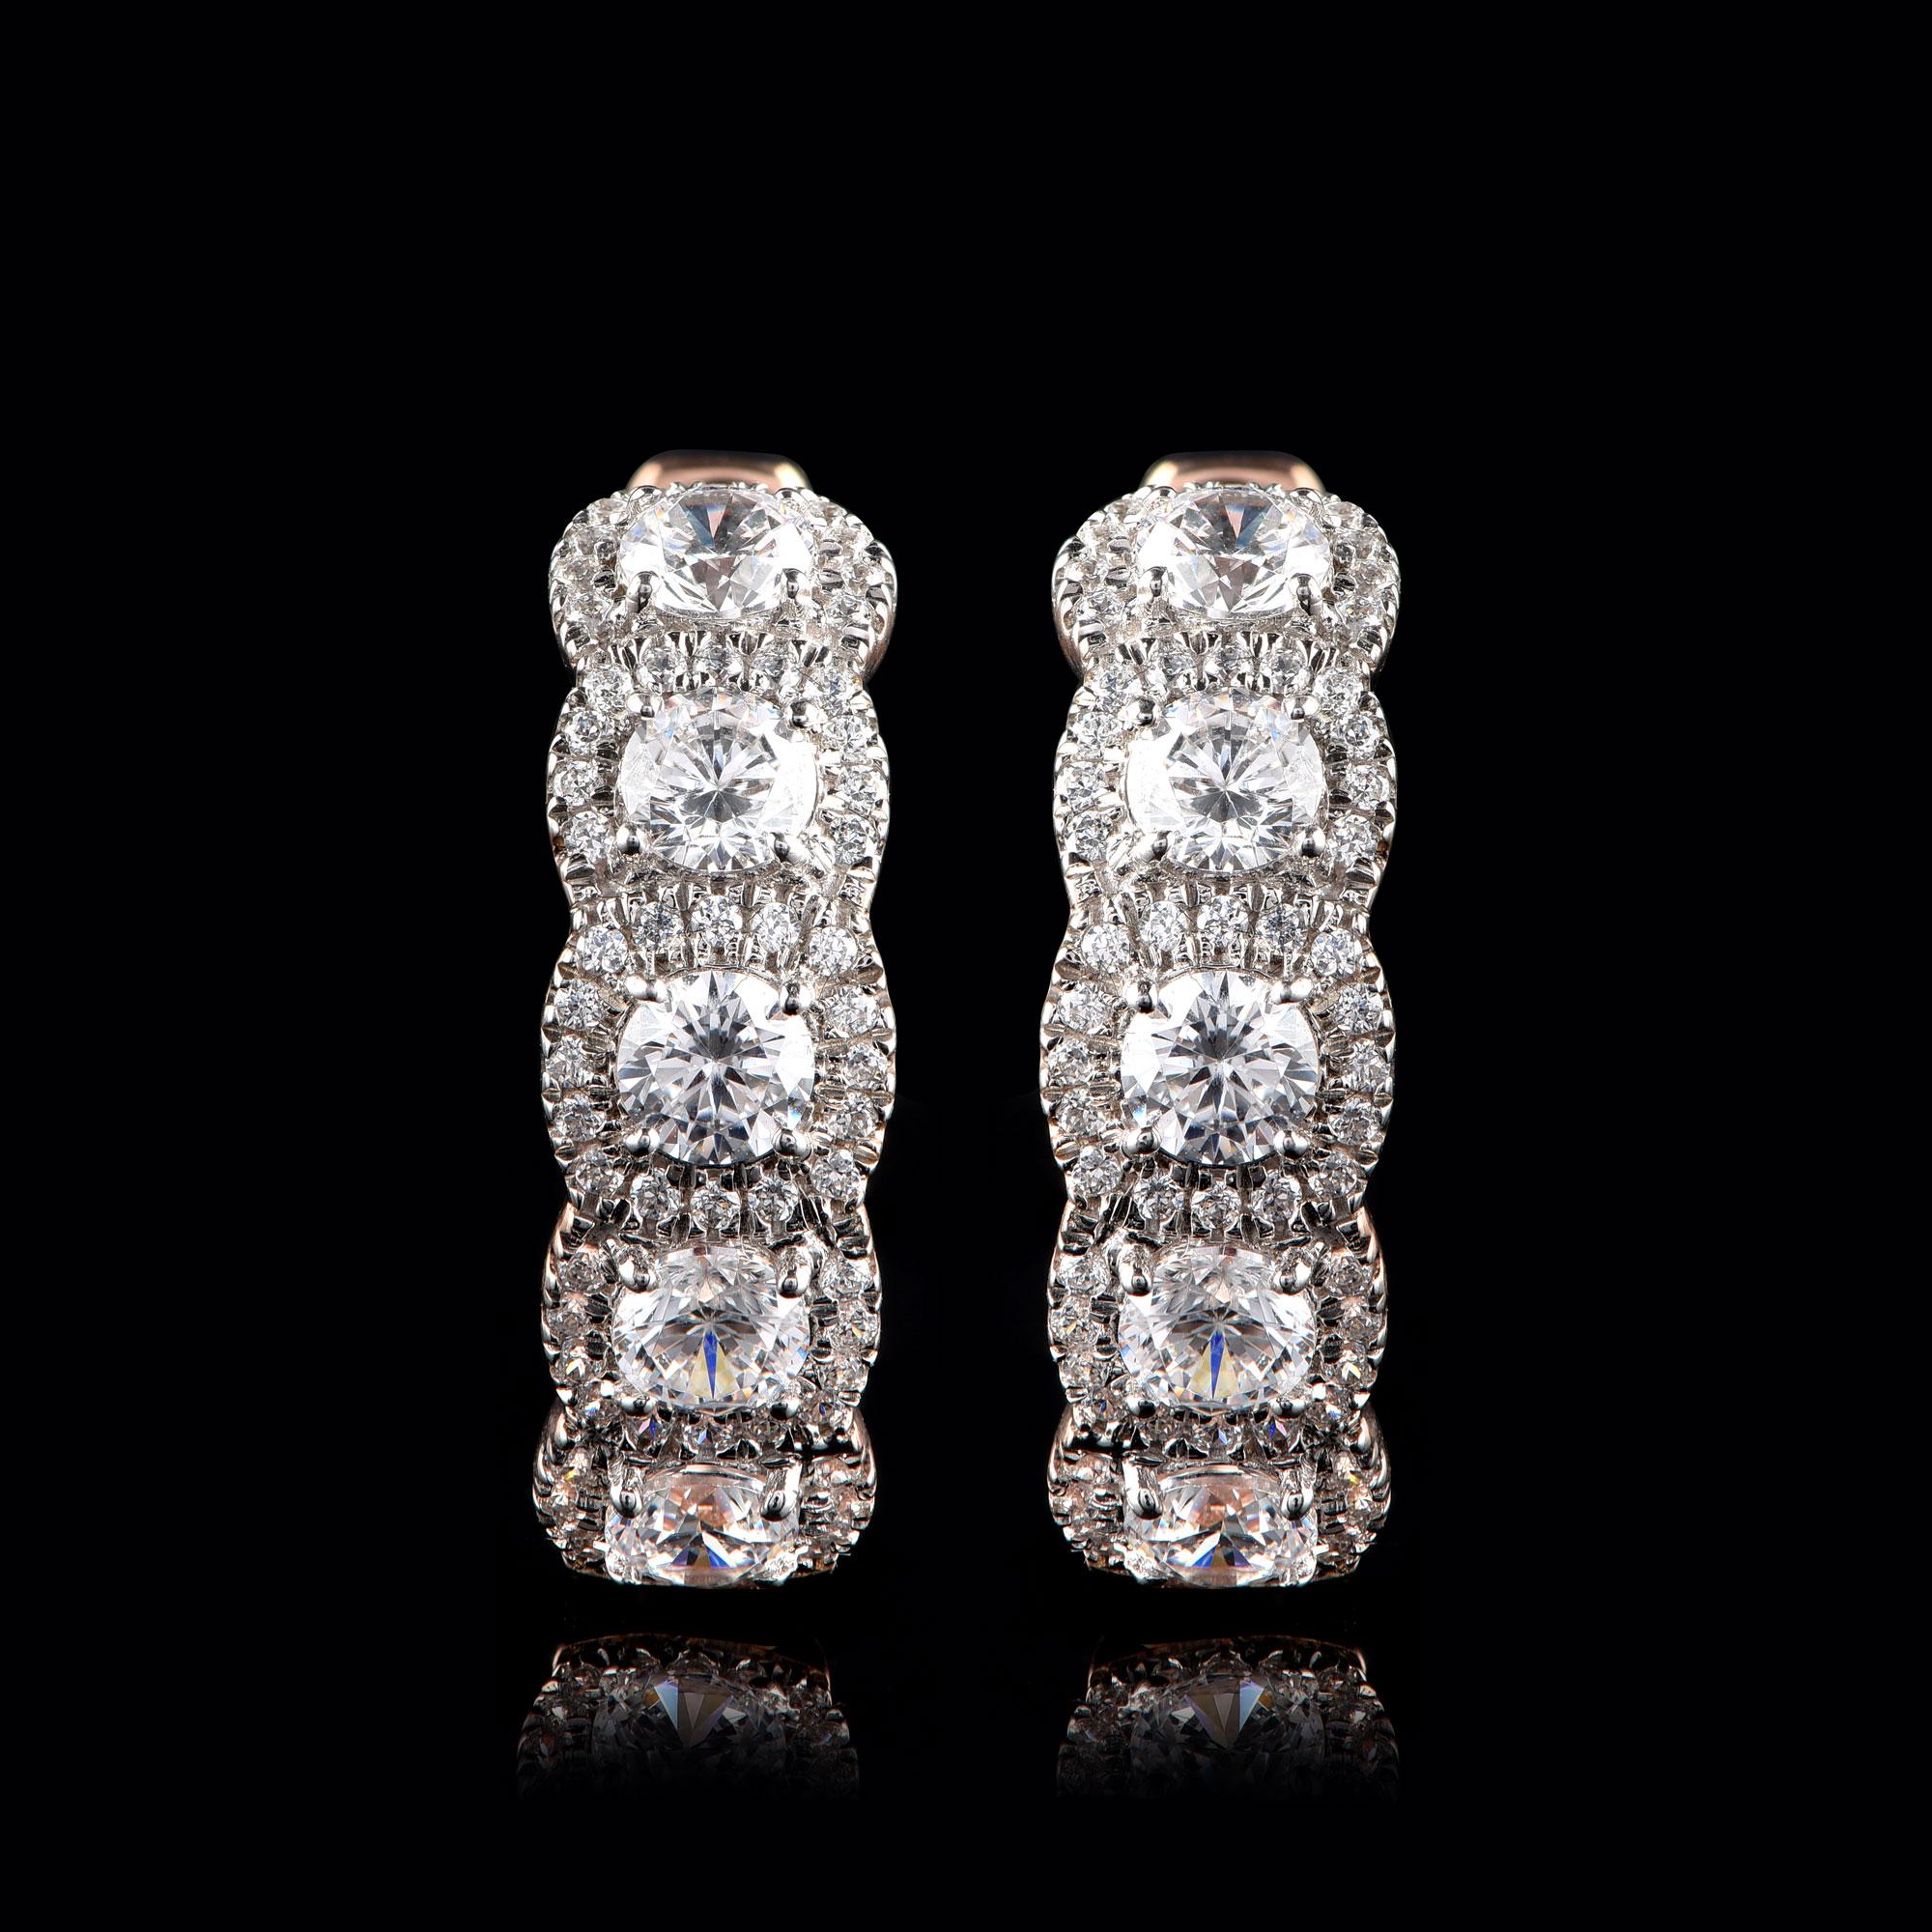 These hoop earrings are studded with 130 brilliant-cut diamonds in micro-prong and prong setting and designed in 18-karat rose gold. The diamonds are graded H-I Color, I2 Clarity.